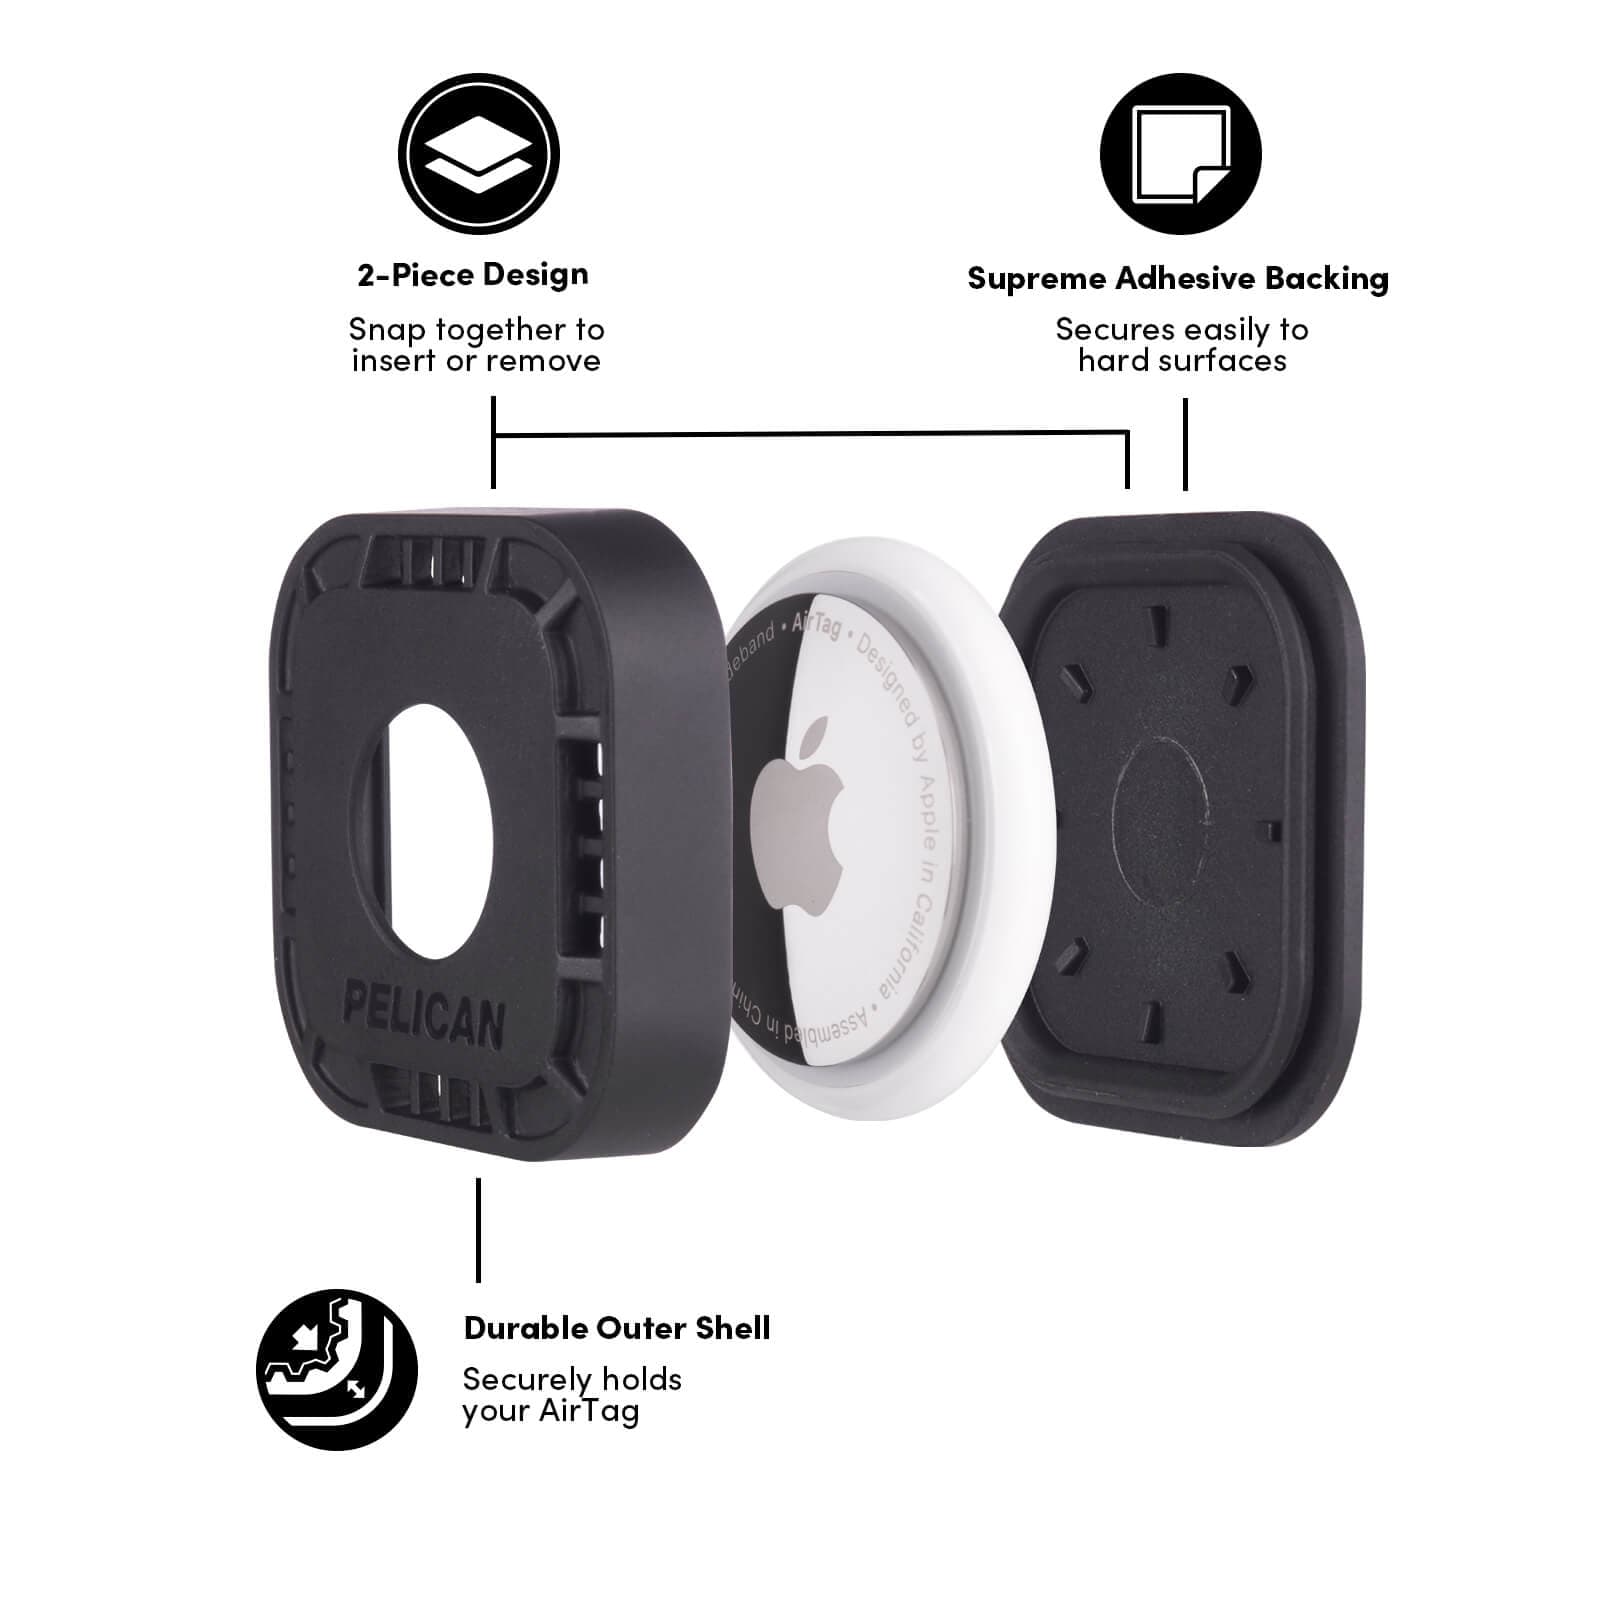 2 Piece Design. Snap together to insert or remove. Supreme Adhesive Backing. Secures easily to hard surfaces. Durable Outer Shell. Securely Holds your AirTag. color::Black